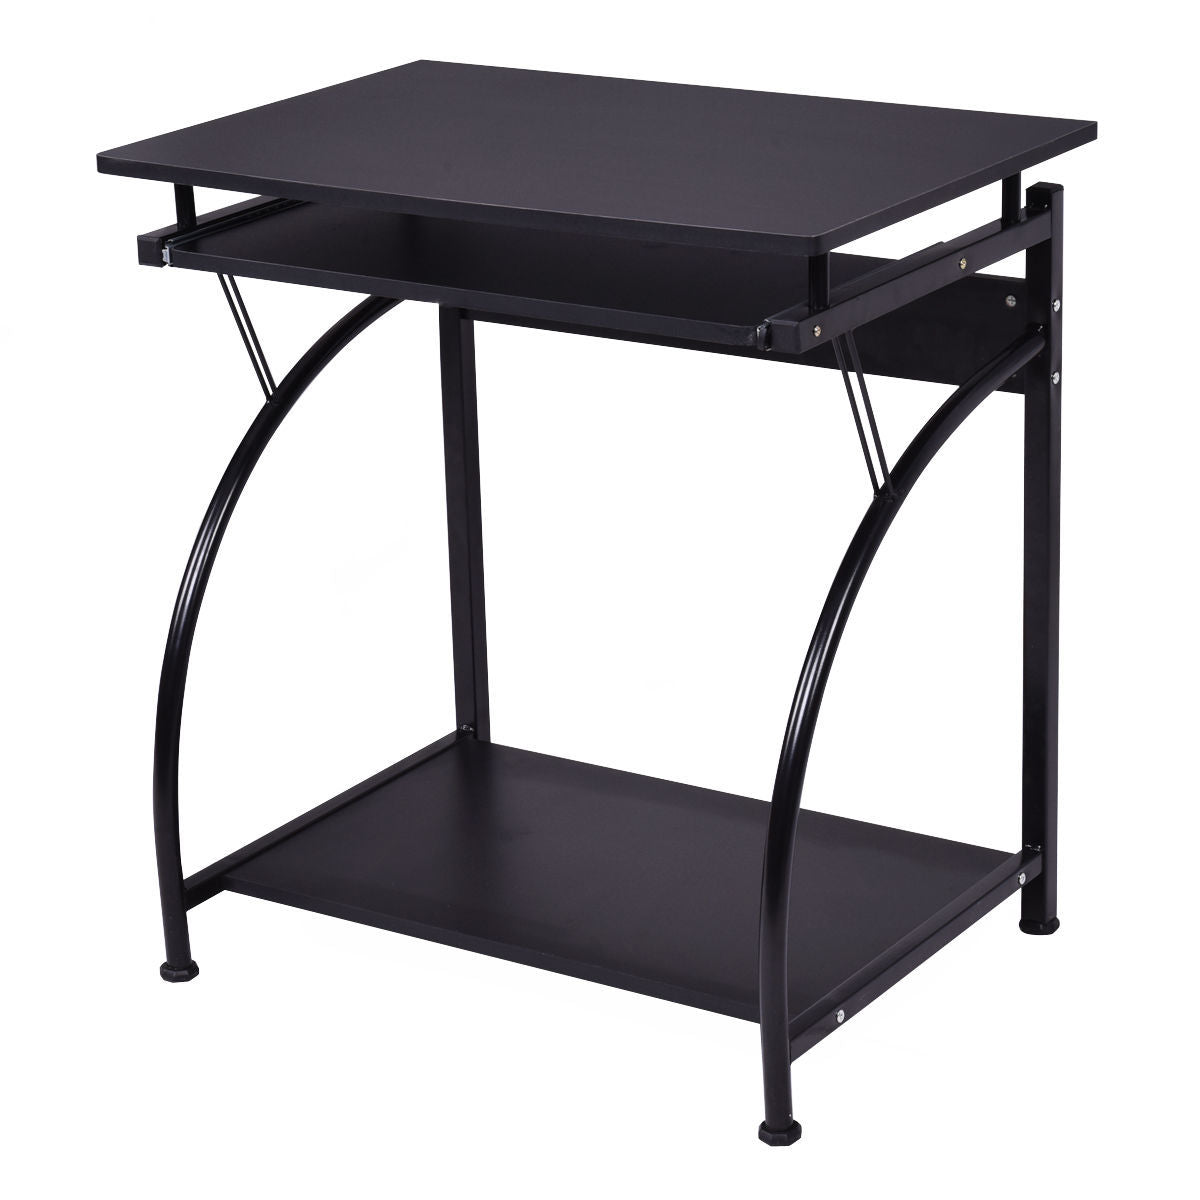 27.5 Inch Laptop Table Computer Desk for Small Spaces with Pull-out Keyboard Tray - Color: Black